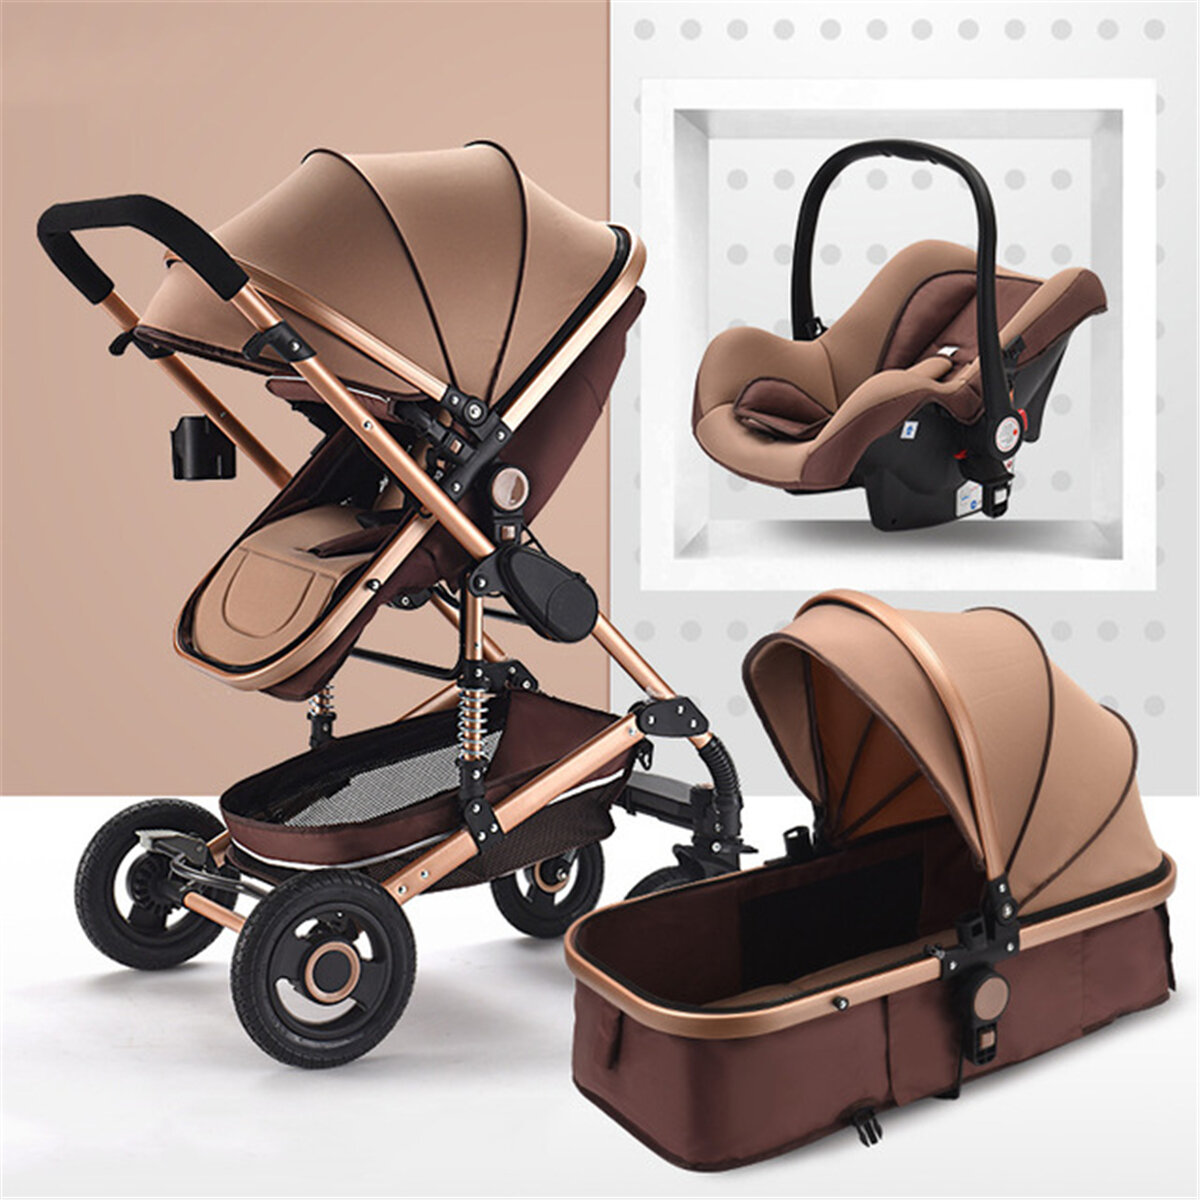 the baby carriage